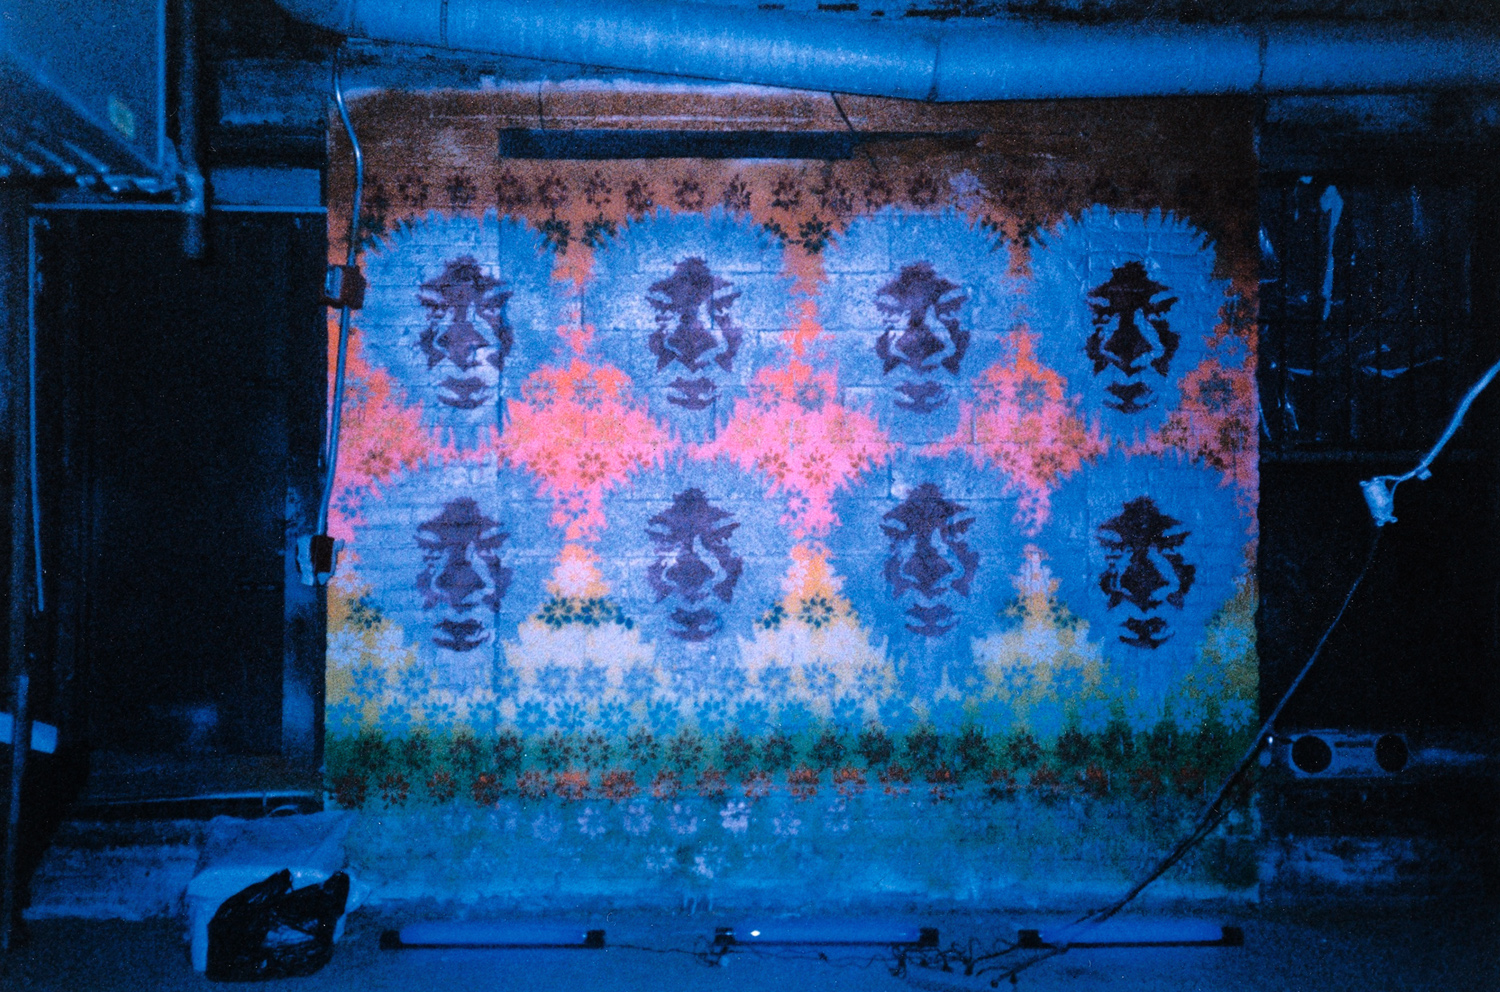  installation view,&nbsp;  Trust No 1  mural commission owery, NY, 1998 